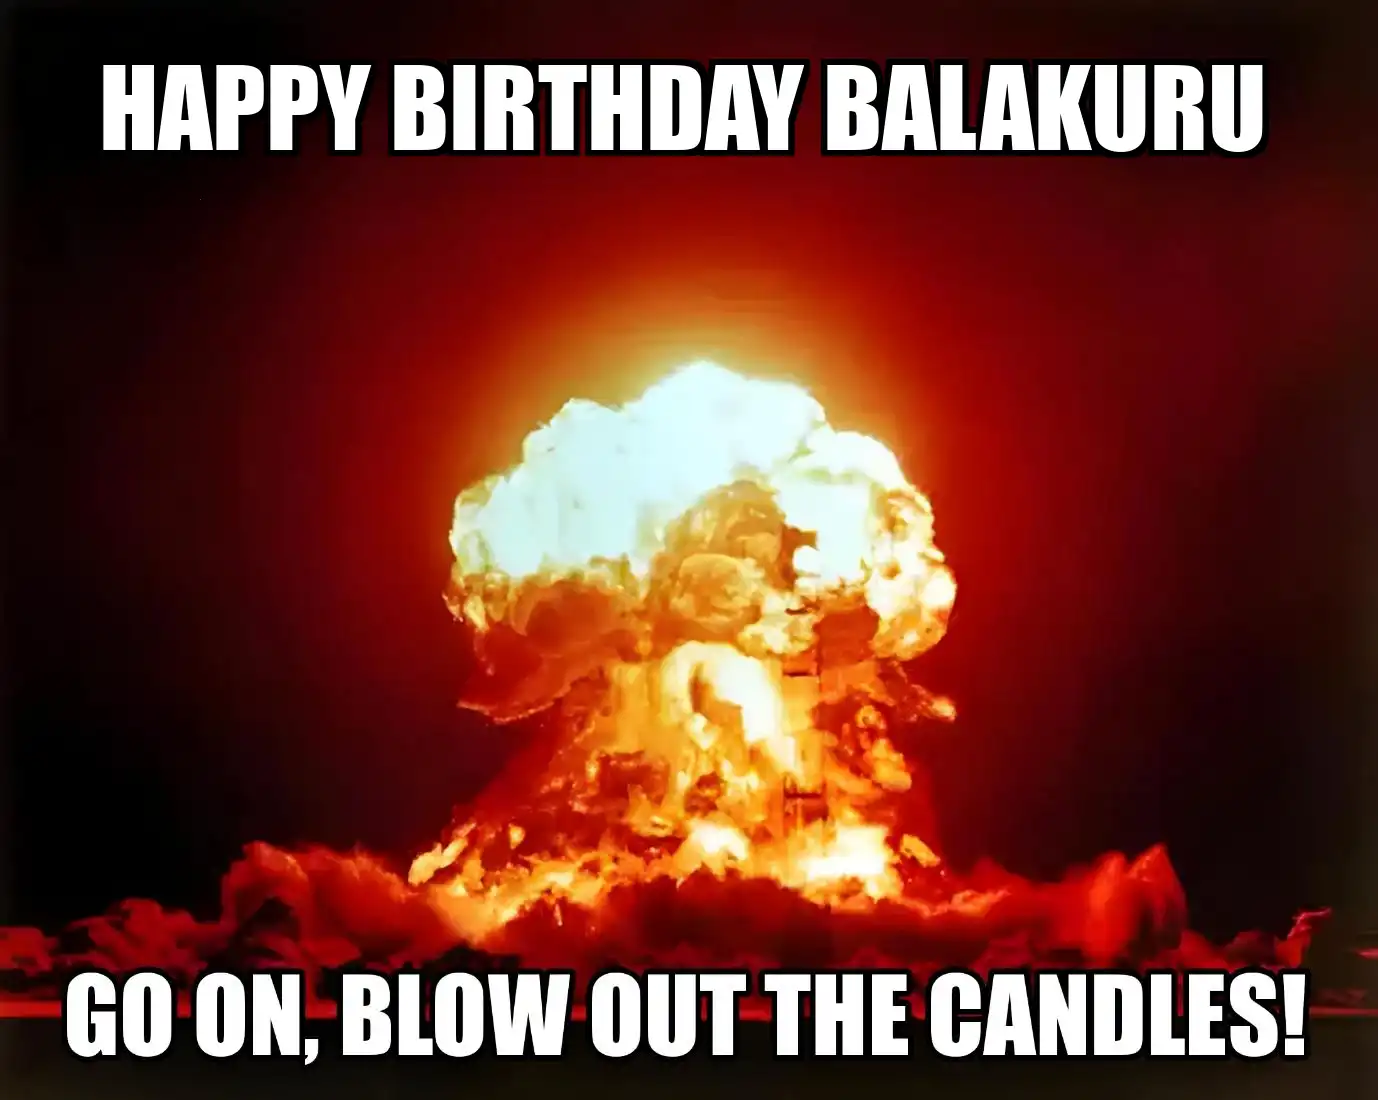 Happy Birthday Balakuru Go On Blow Out The Candles Meme